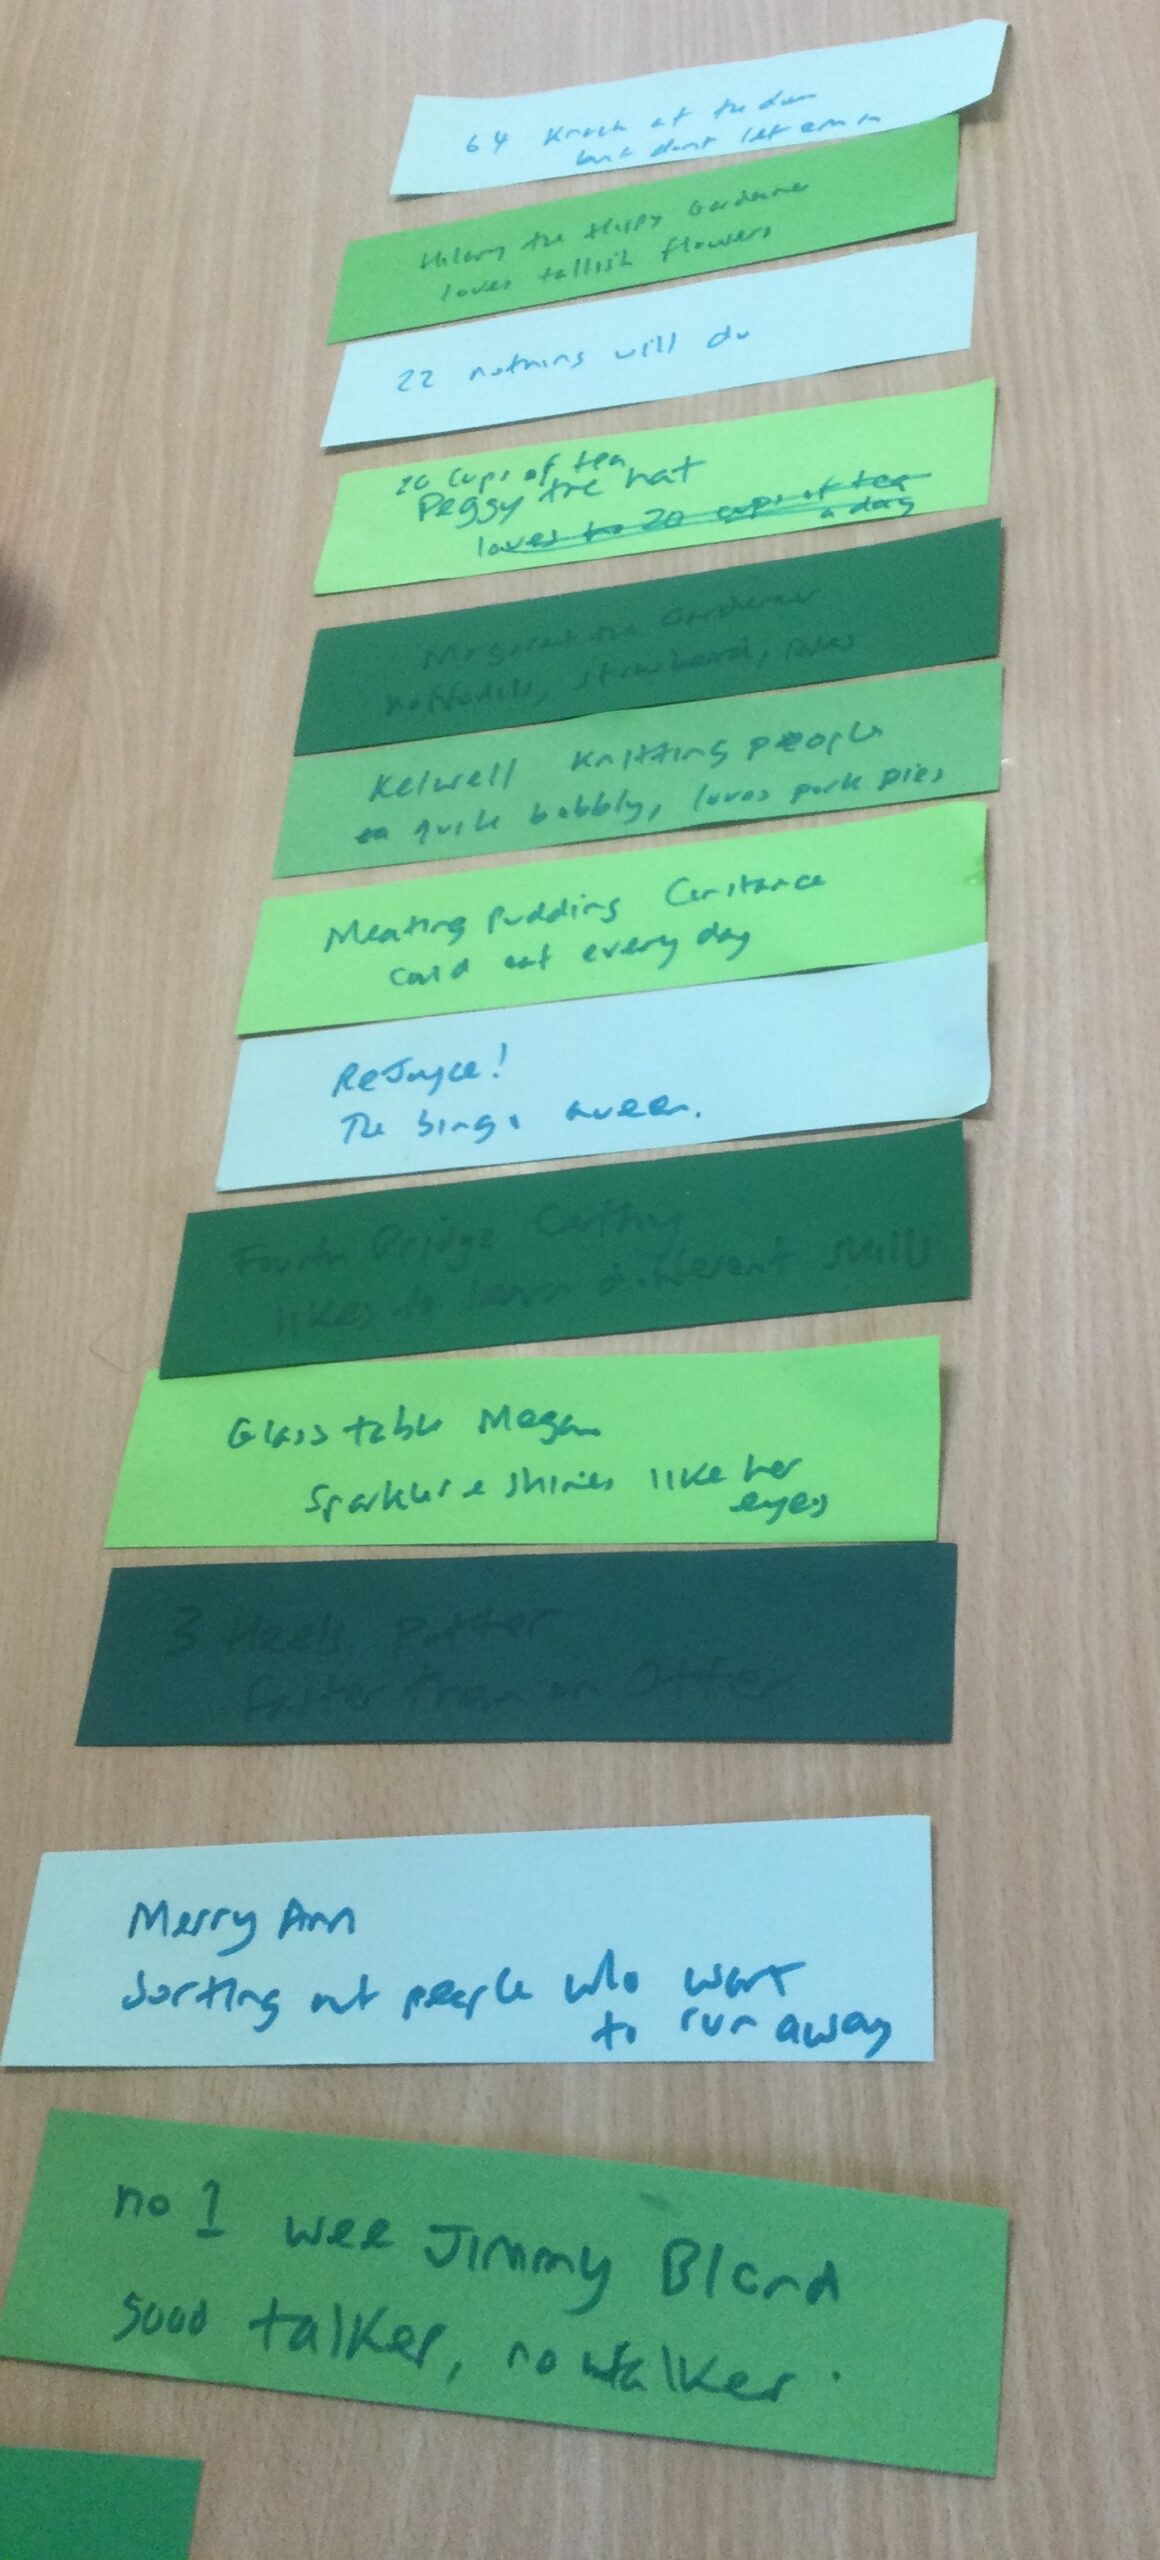 Strips of paper in different shades of green lined up on a table top